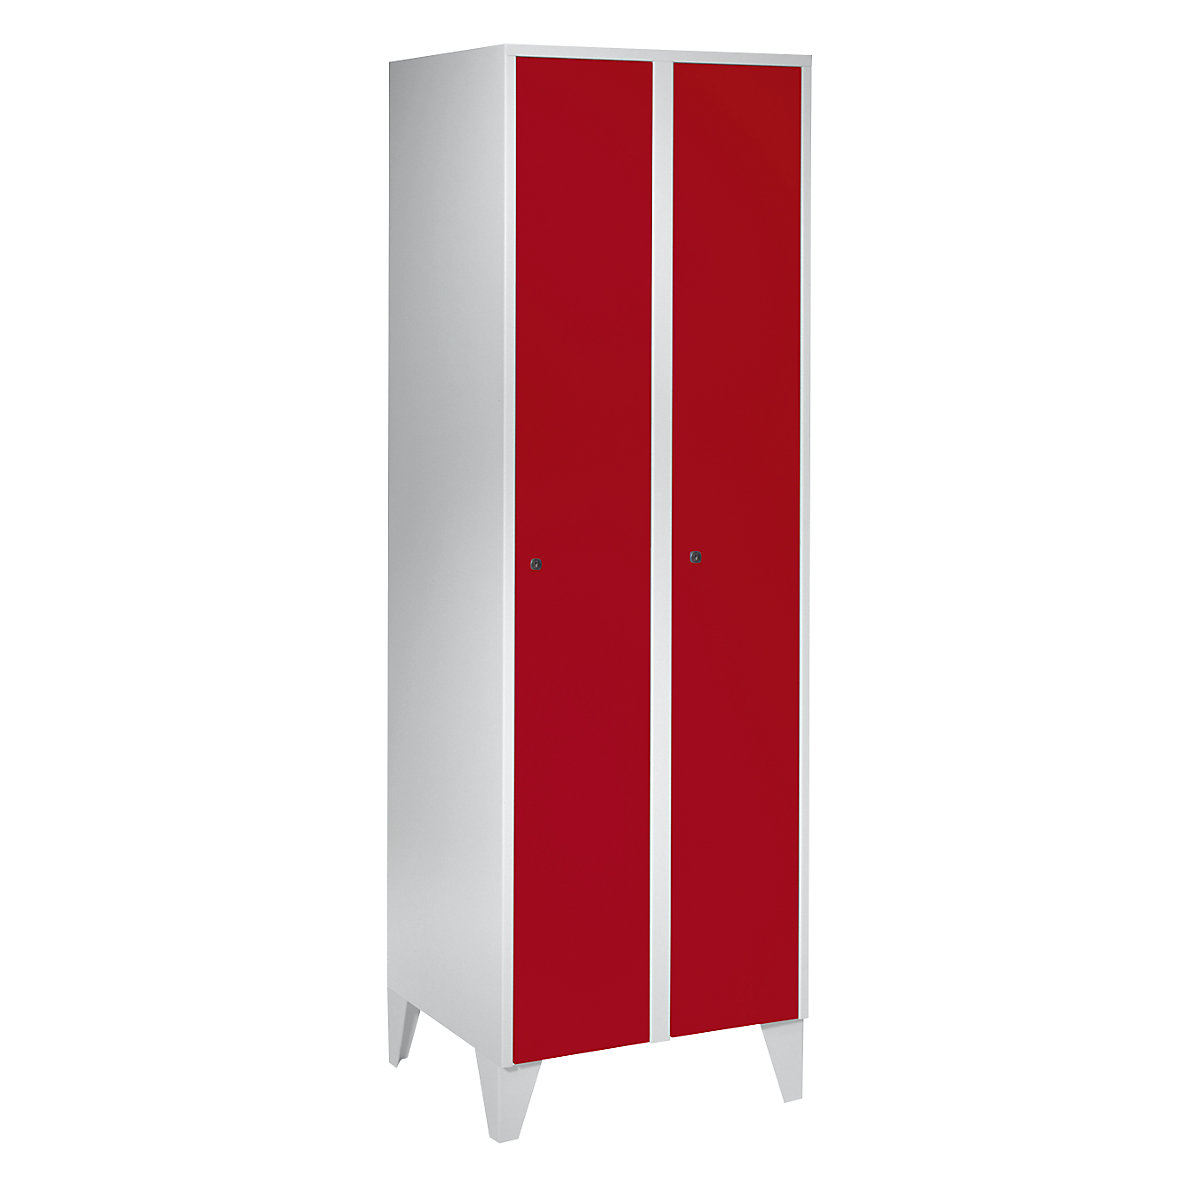 Cloakroom locker with feet – Wolf, HxWxD 1850 x 600 x 500 mm, 2 compartments, flame red-5